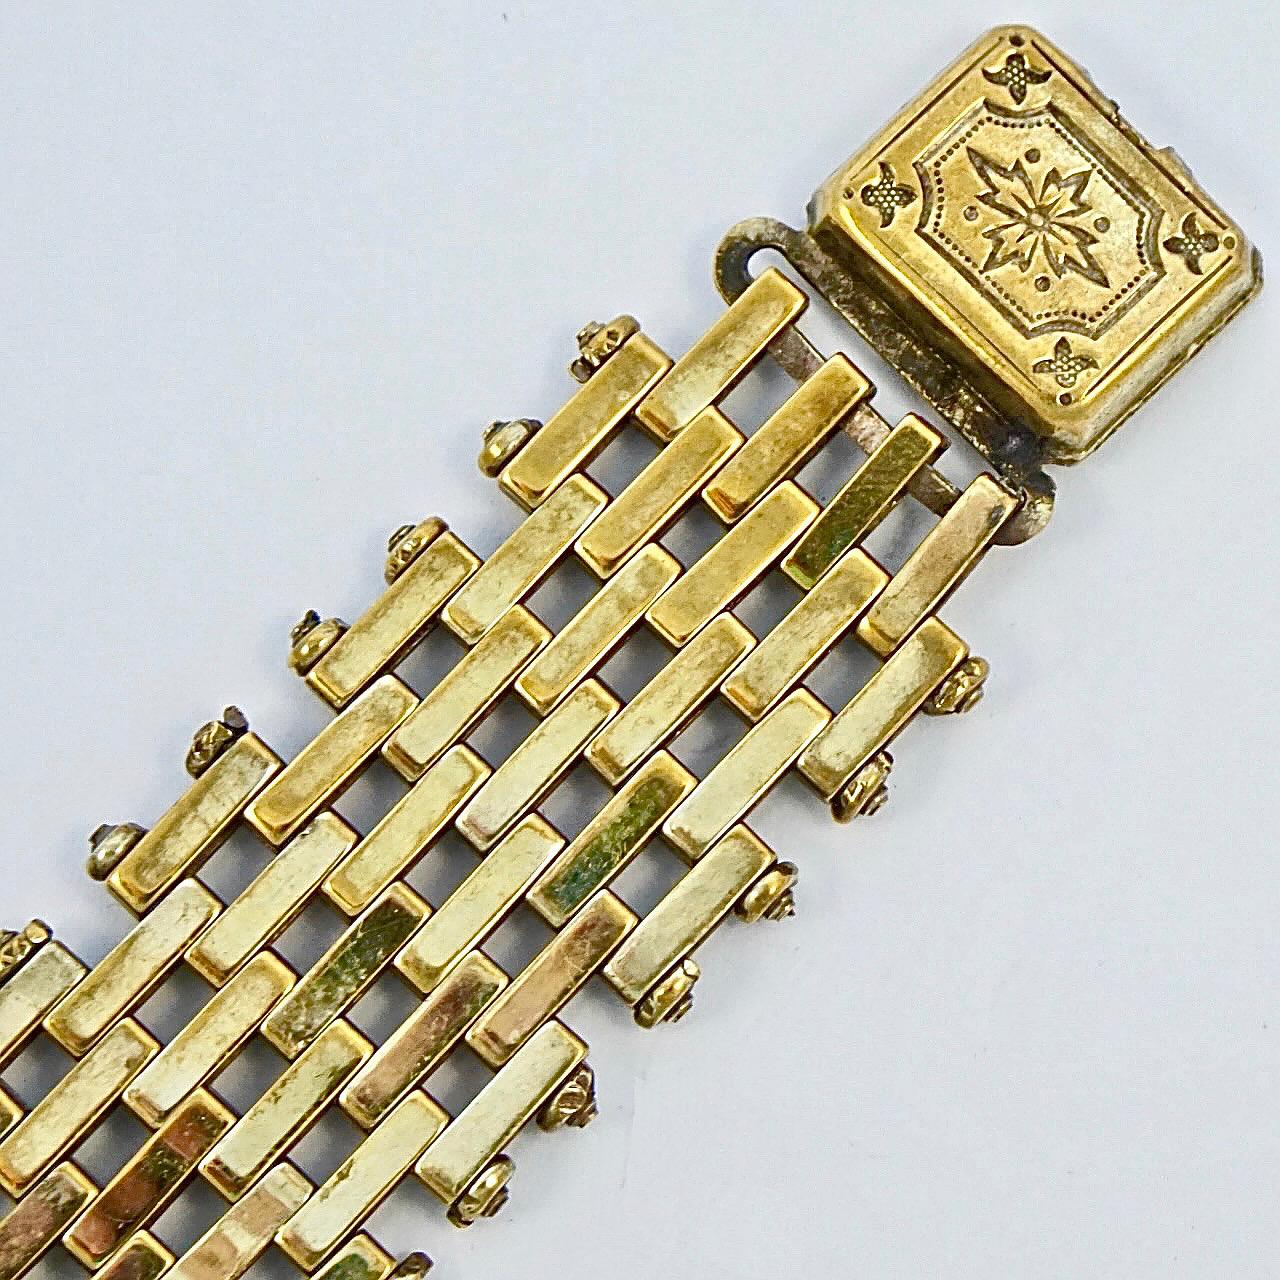 
Wonderful Jakob Bengel Art Deco gold tone bracelet with brickwork links and an ornate clasp. Circa 1930s. Measuring length 17.8 cm / 7 inches by width 1.9 cm / .75 inch. The bracelet is in very good condition, there is some wear to the gold tone